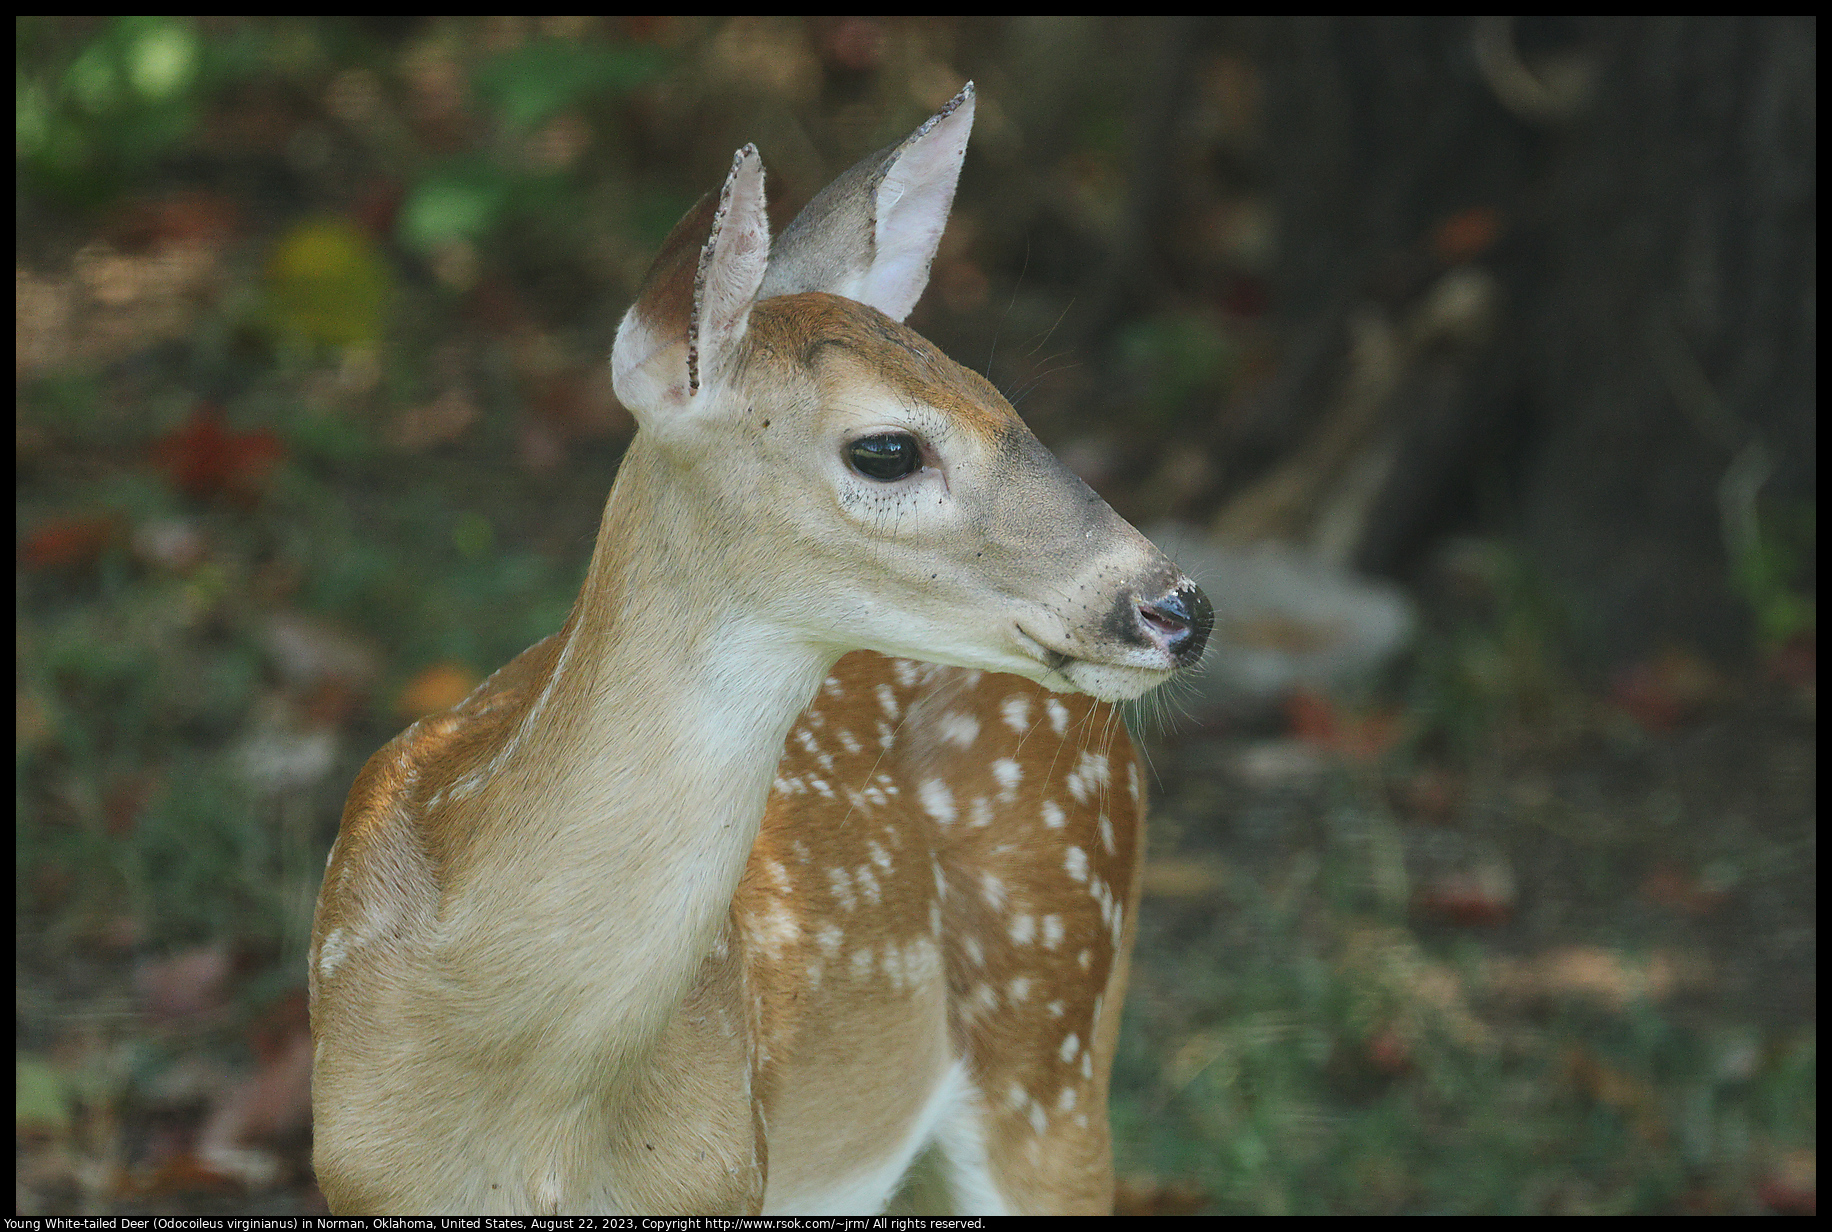 Young White-tailed Deer (Odocoileus virginianus) in Norman, Oklahoma, United States, August 22, 2023